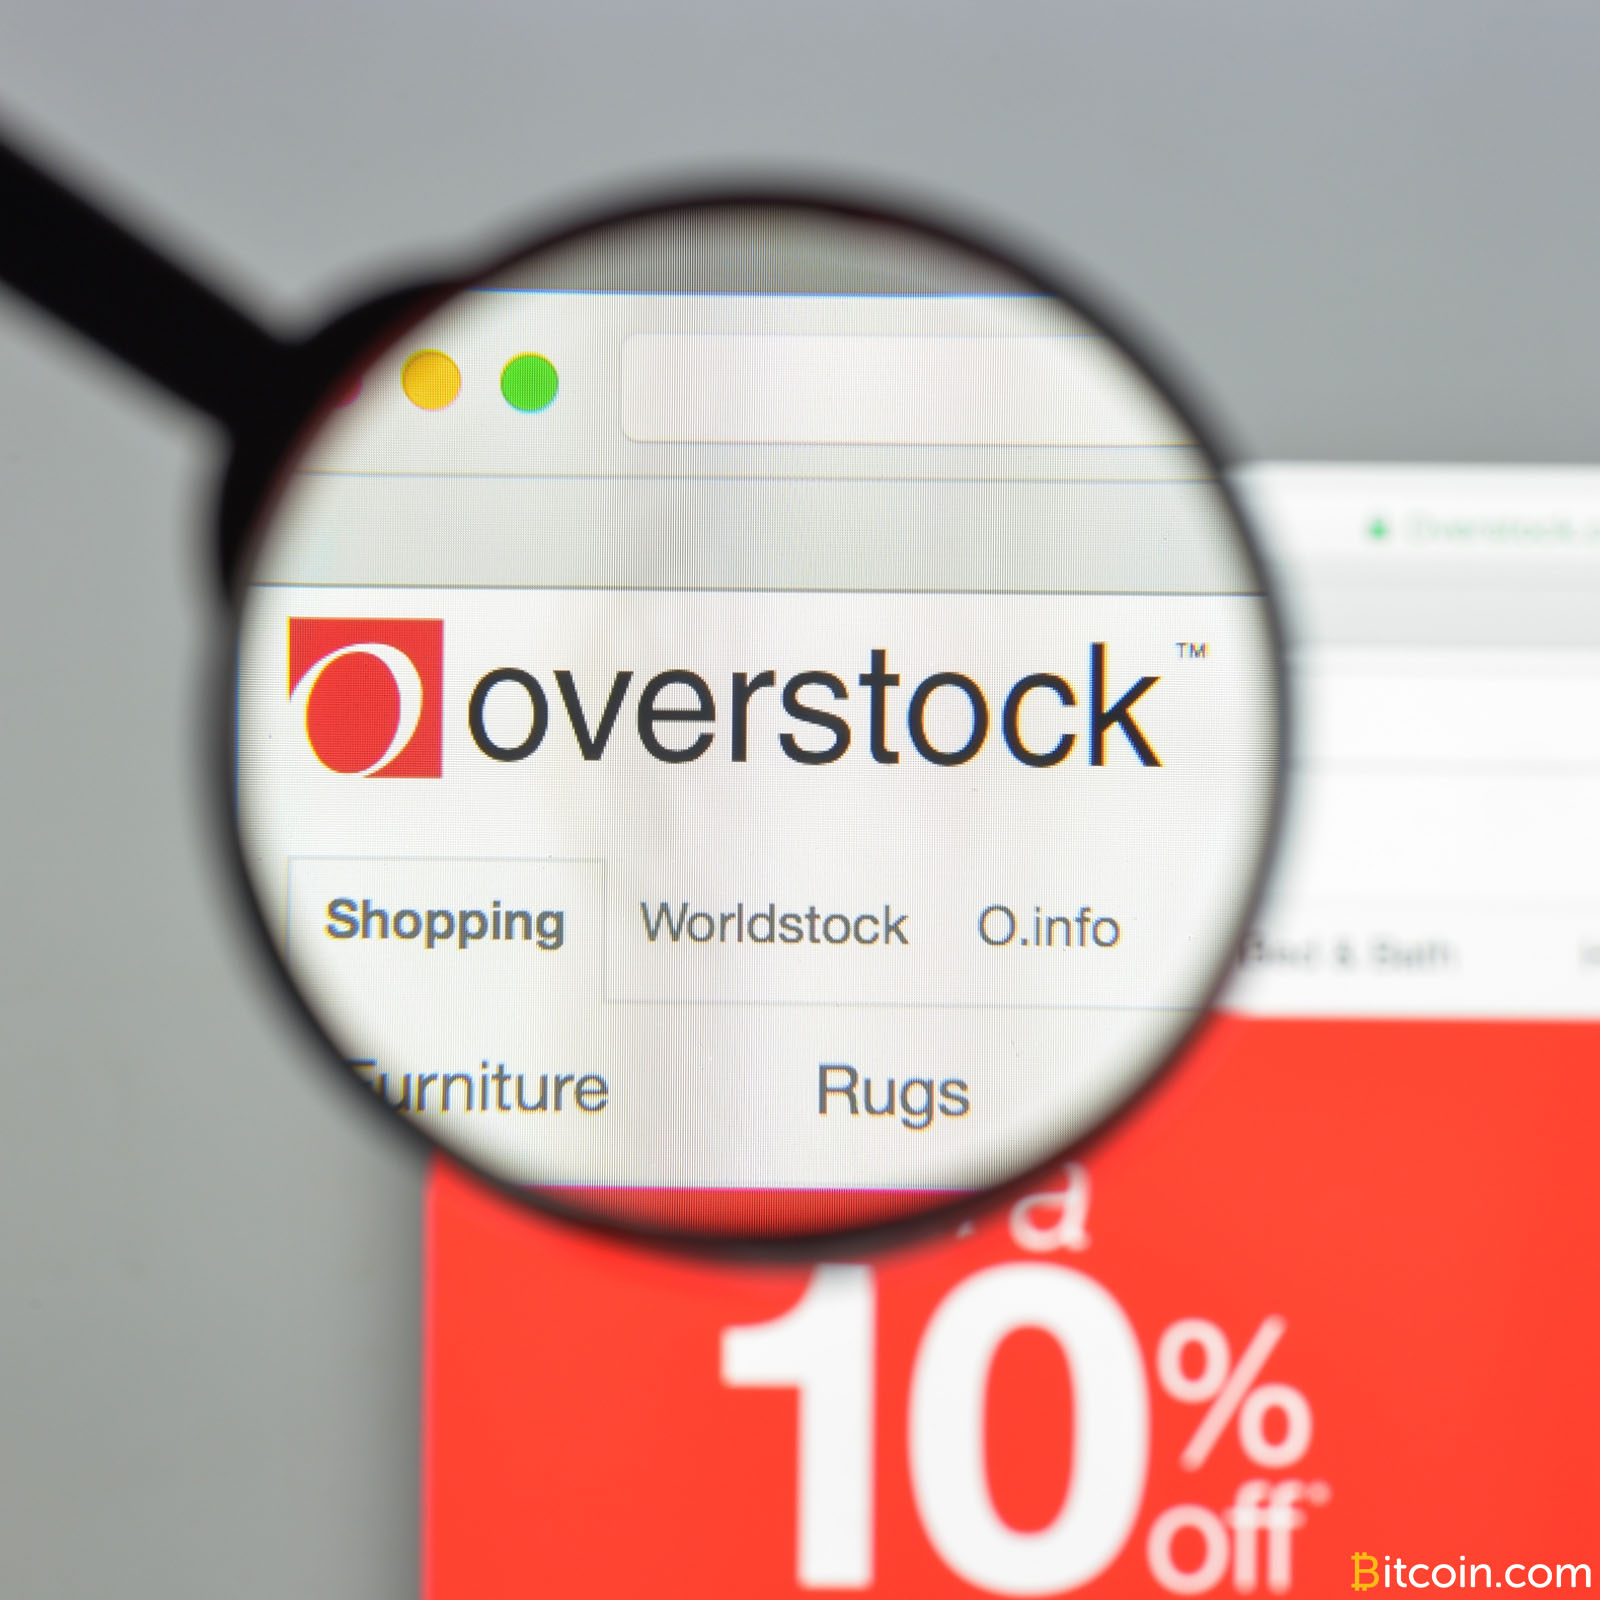 Overstock.com's Stock Shares Soar in Relation to Bitcoin